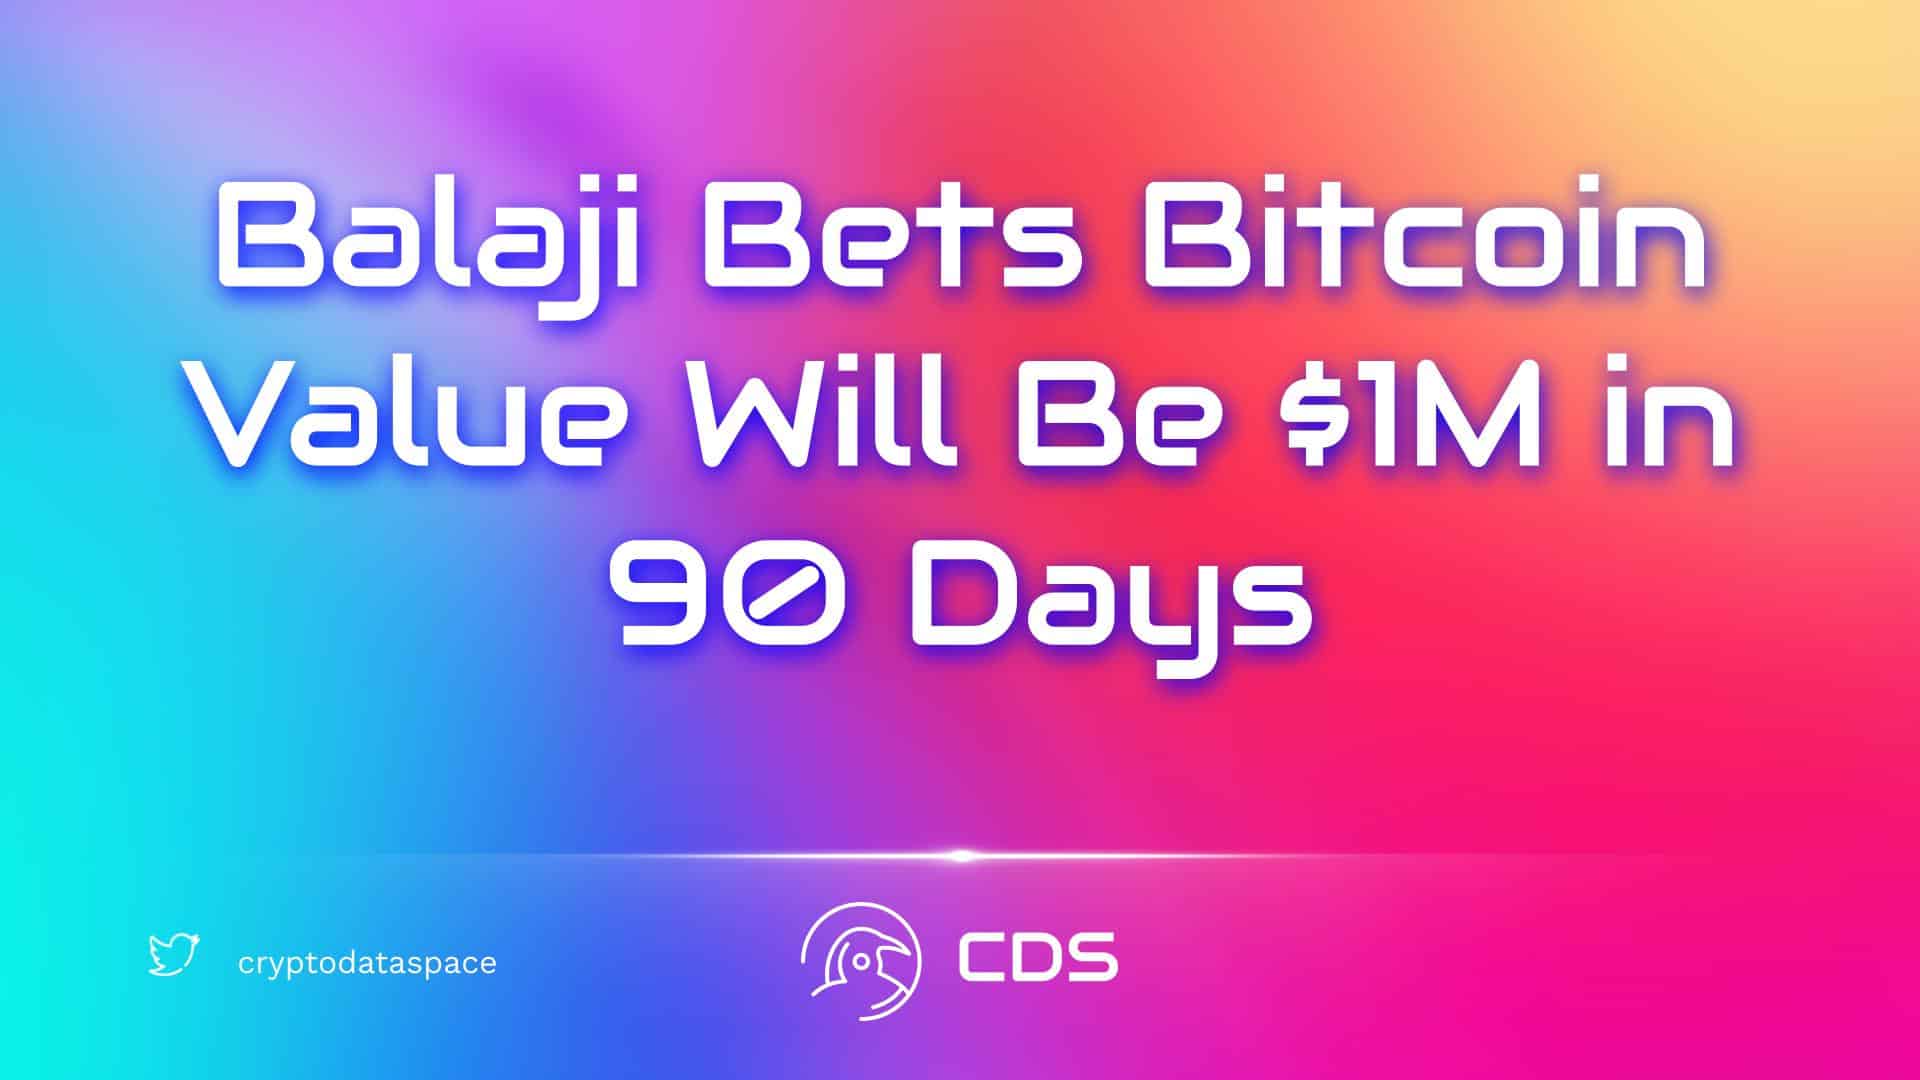 Balaji Bets Bitcoin Value Will Be $1M in 90 Days